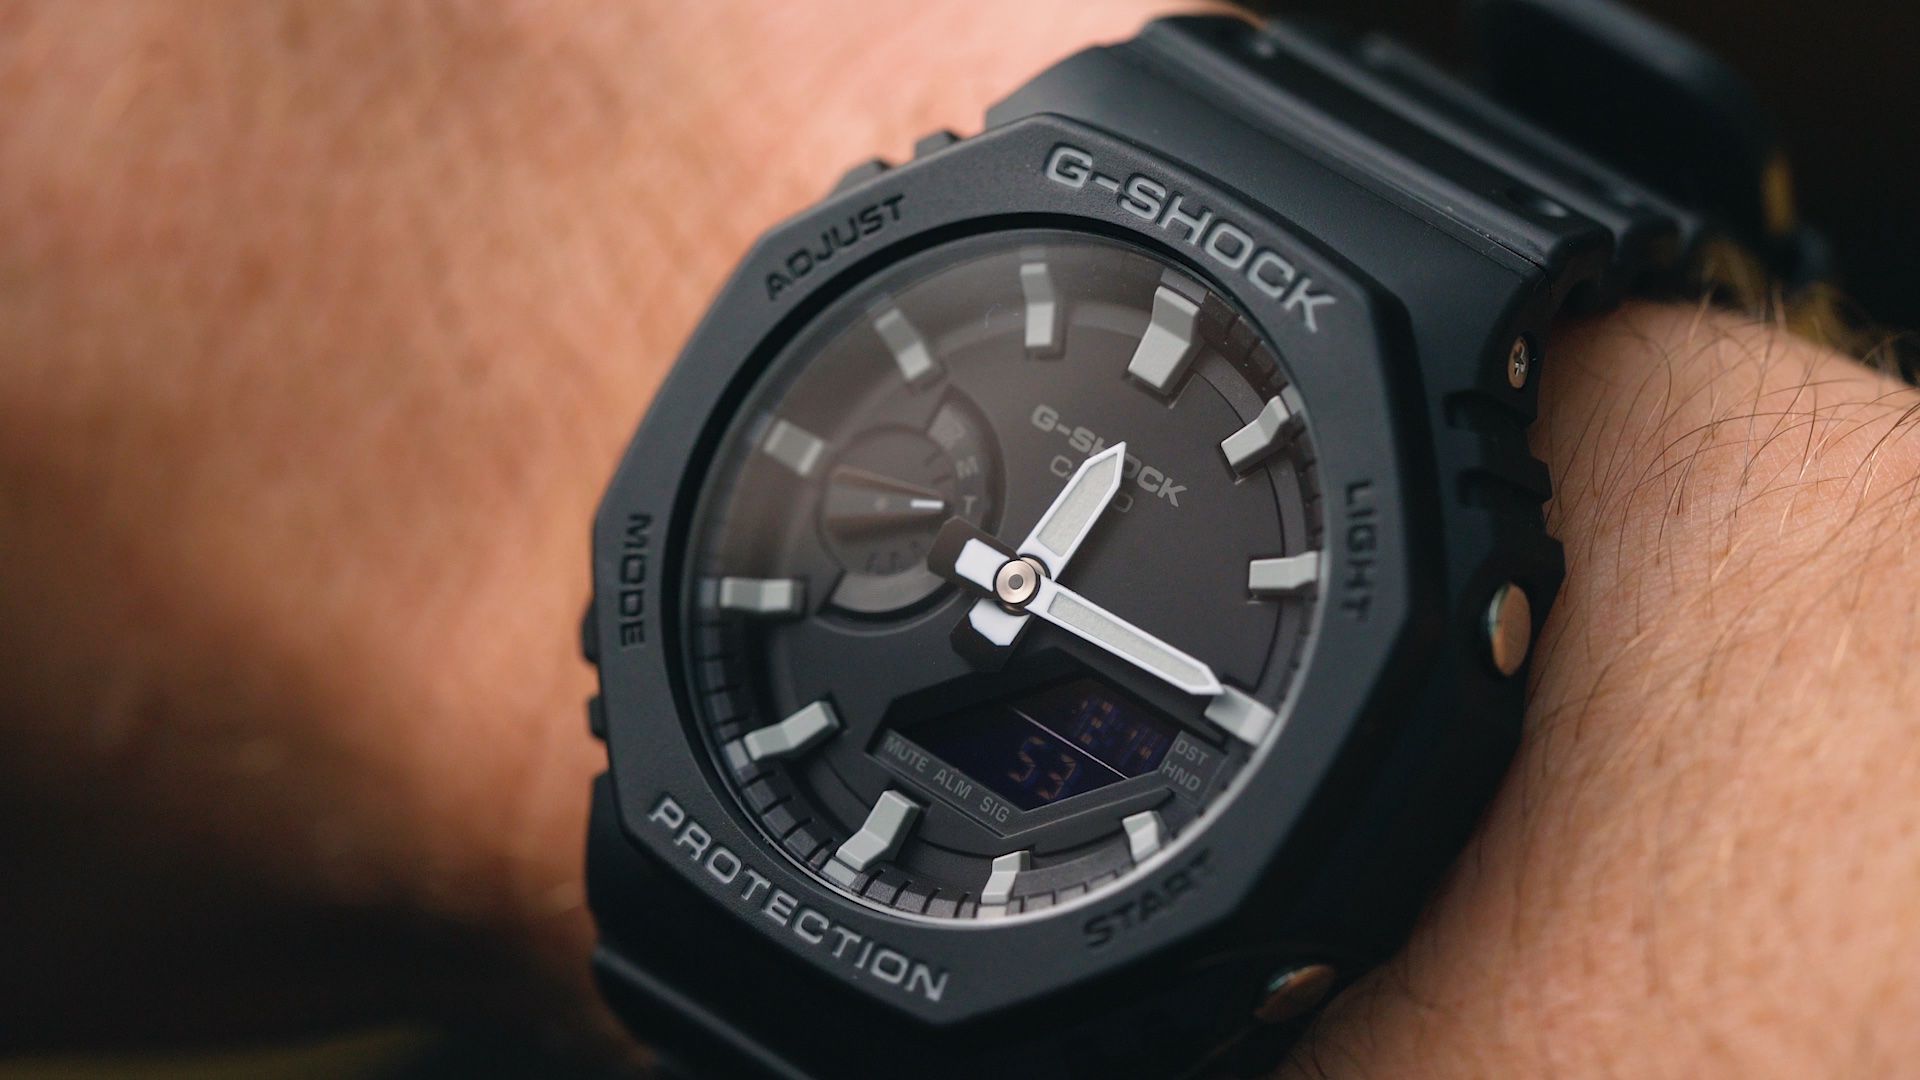 THE IMMORTALS – The G-Shock “CasiOak” backed legendary toughness with a radical new design